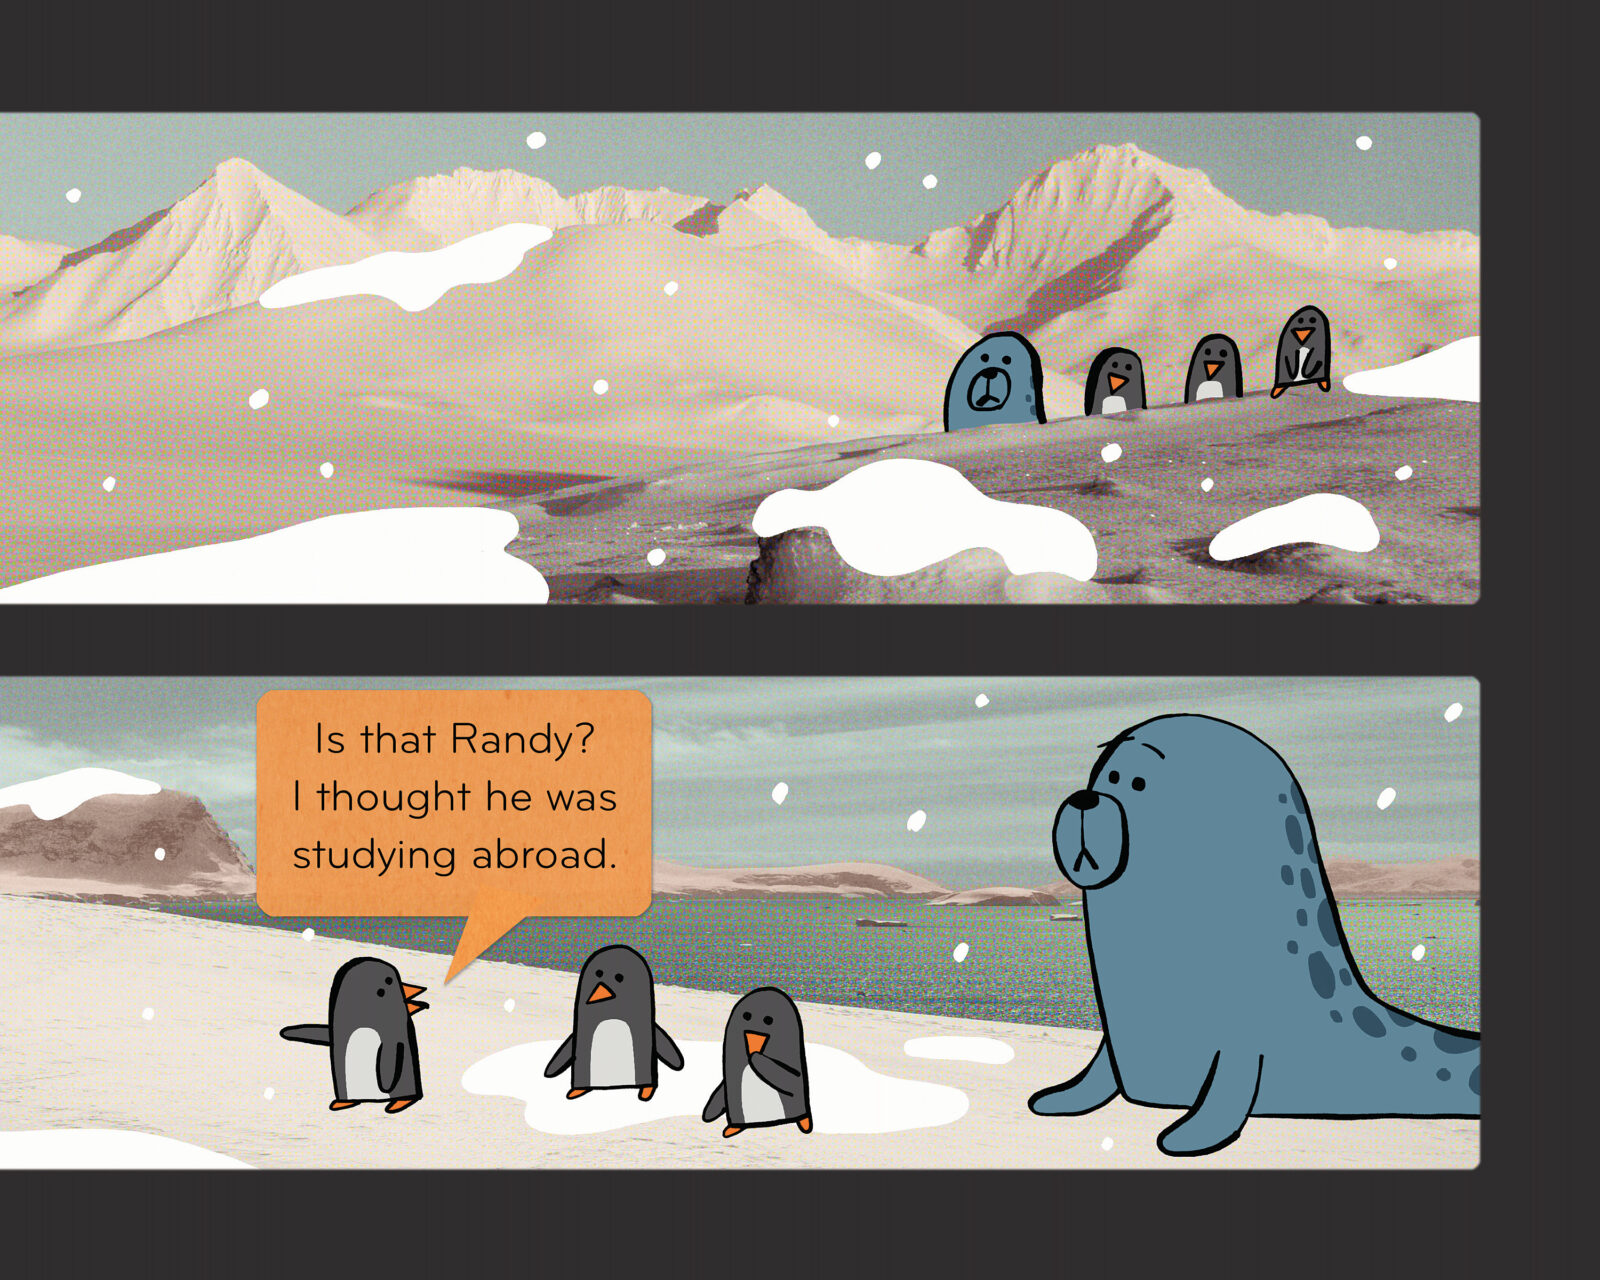 Seals Are Jerks! by Jared Chapman